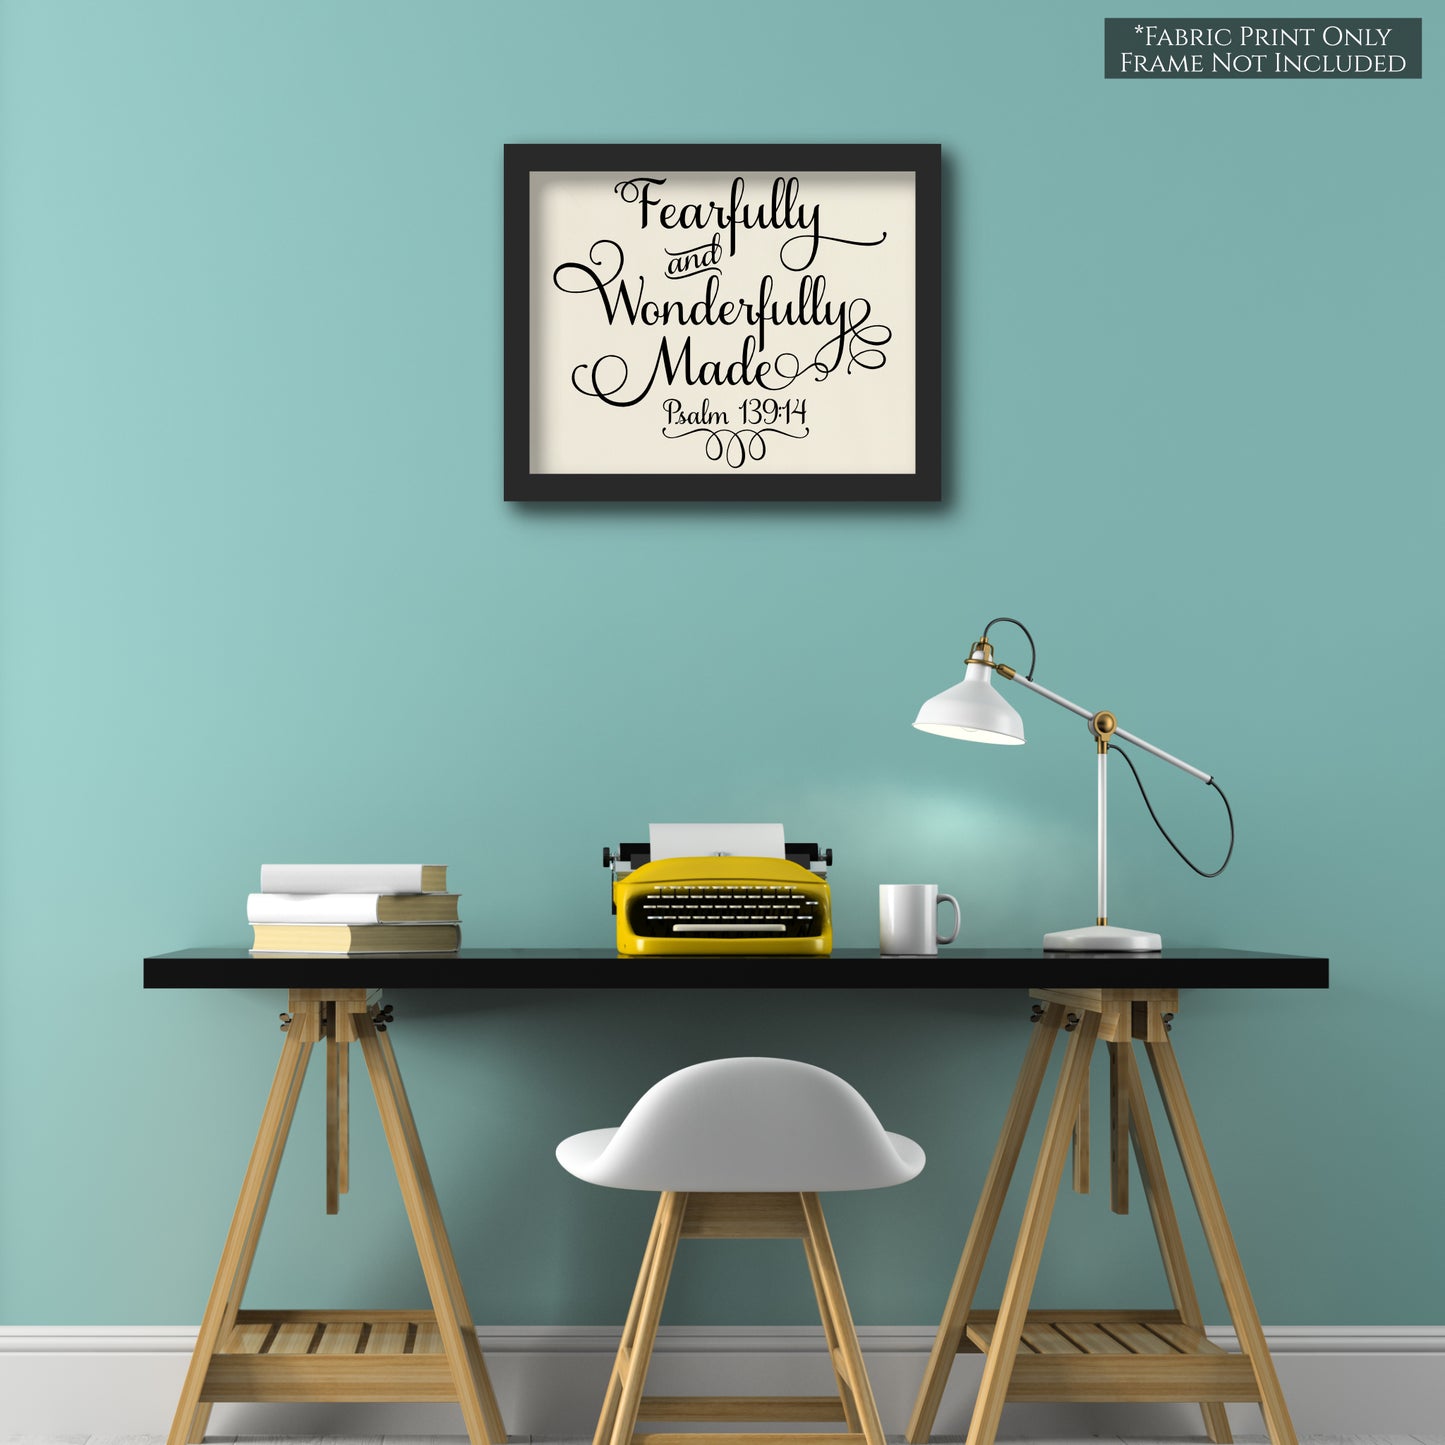 I am fearfully and wonderfully made - Psalm 139:14, Fabric Panel Print, Quilt Block, Scripture Fabric, Girl - Wall Art